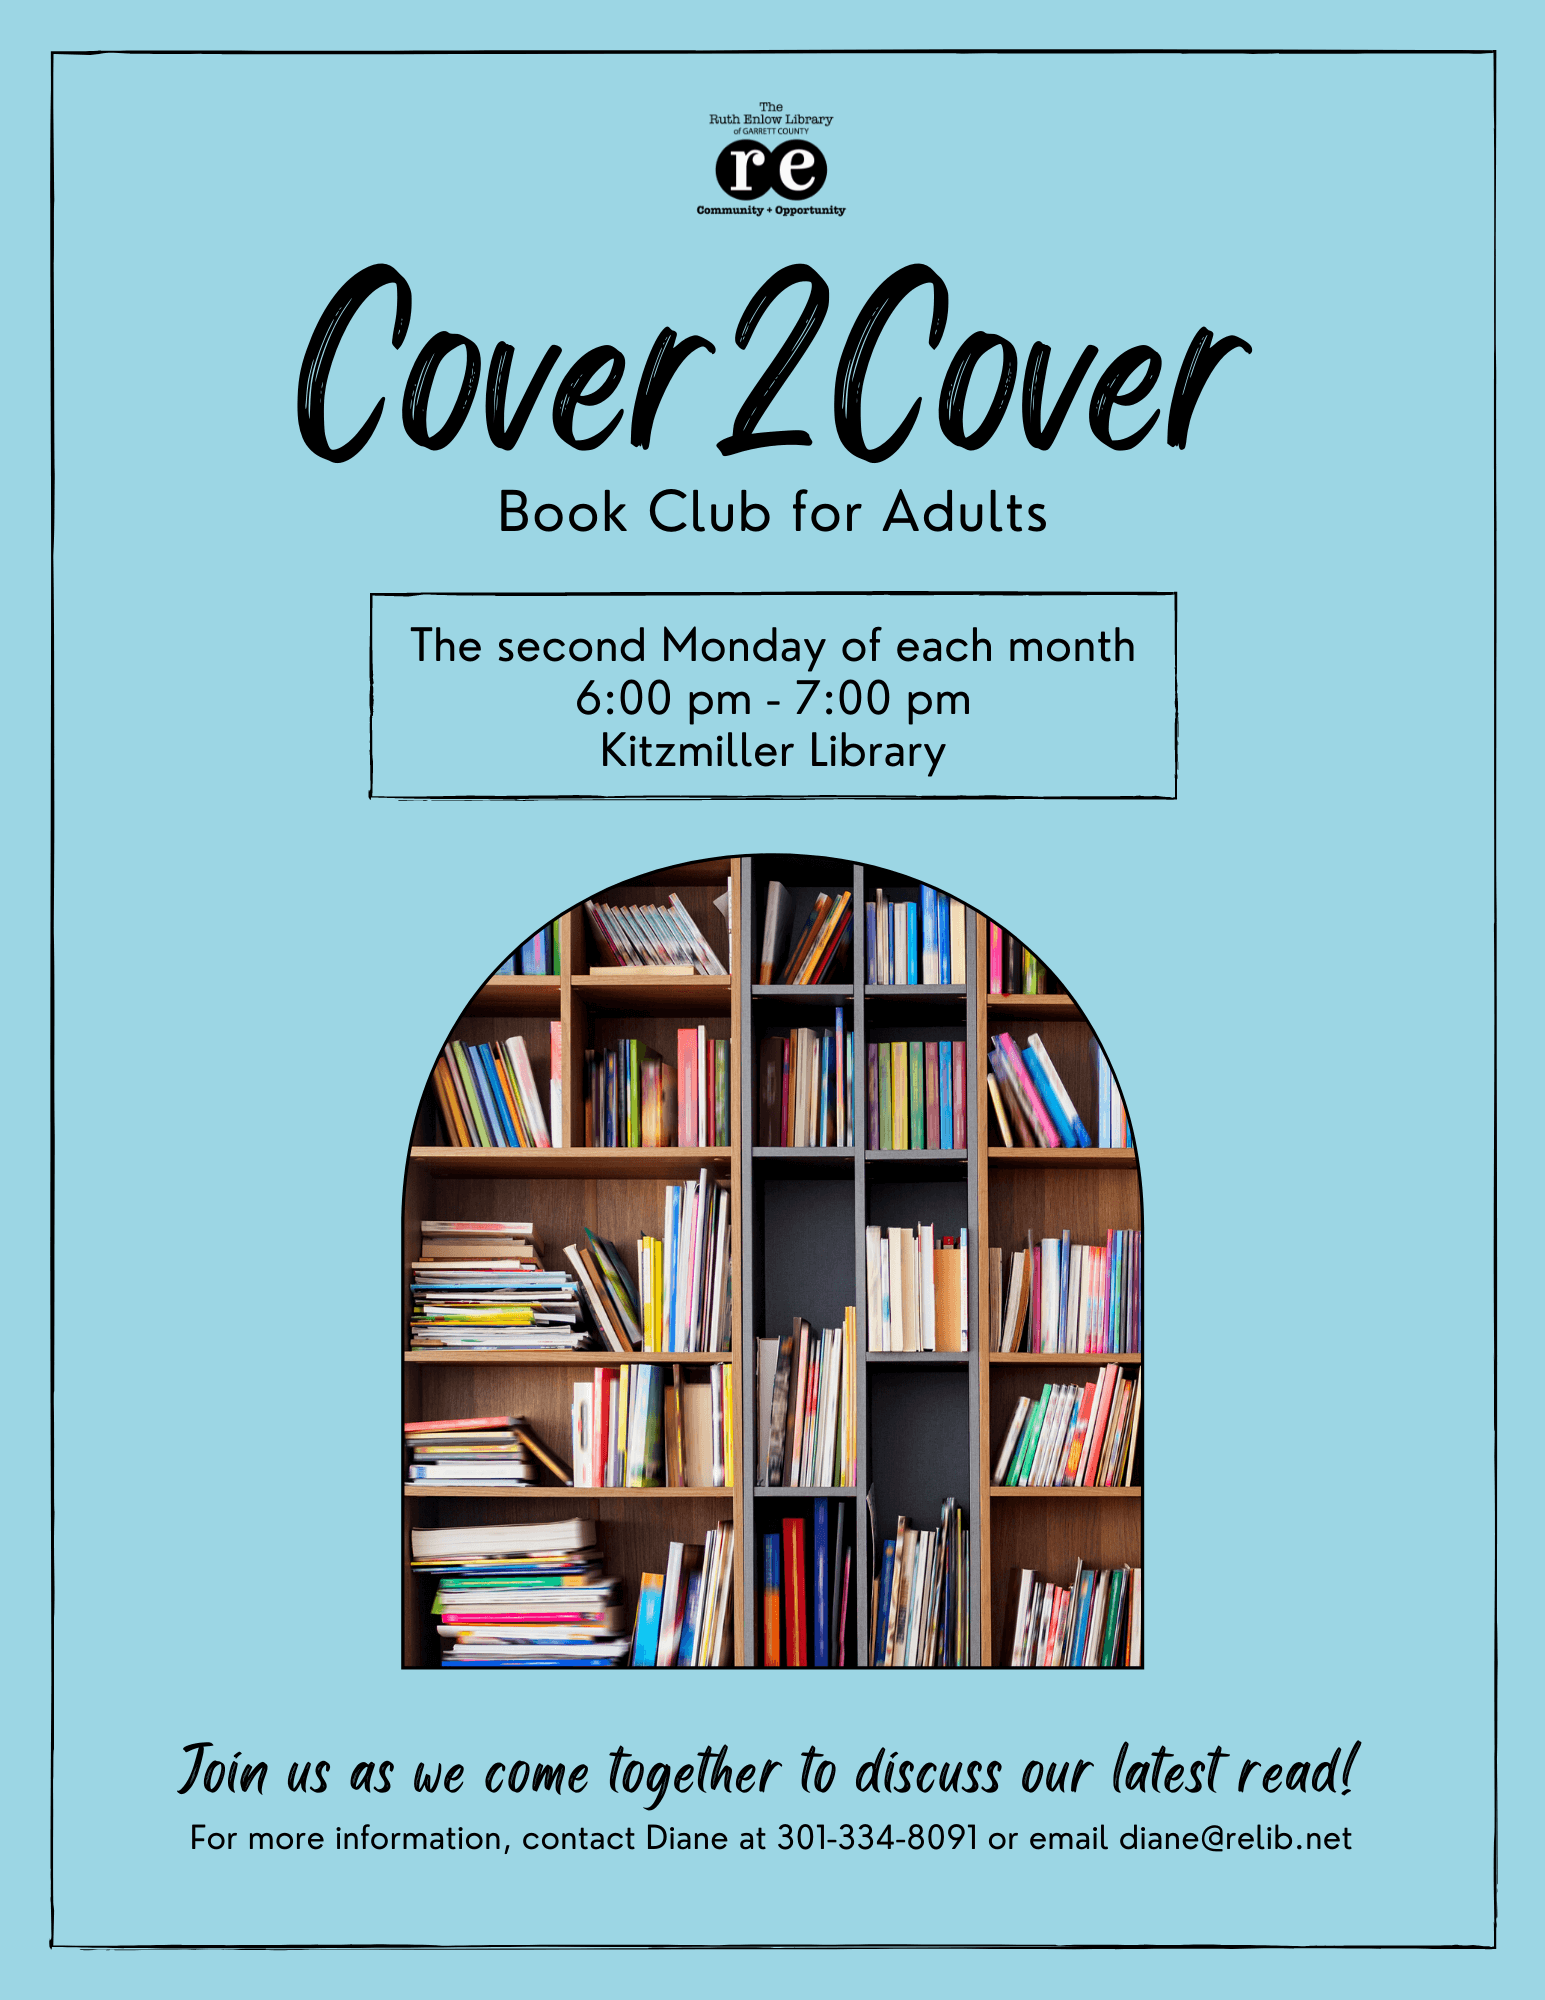 Cover2Cover: Adult Book Club